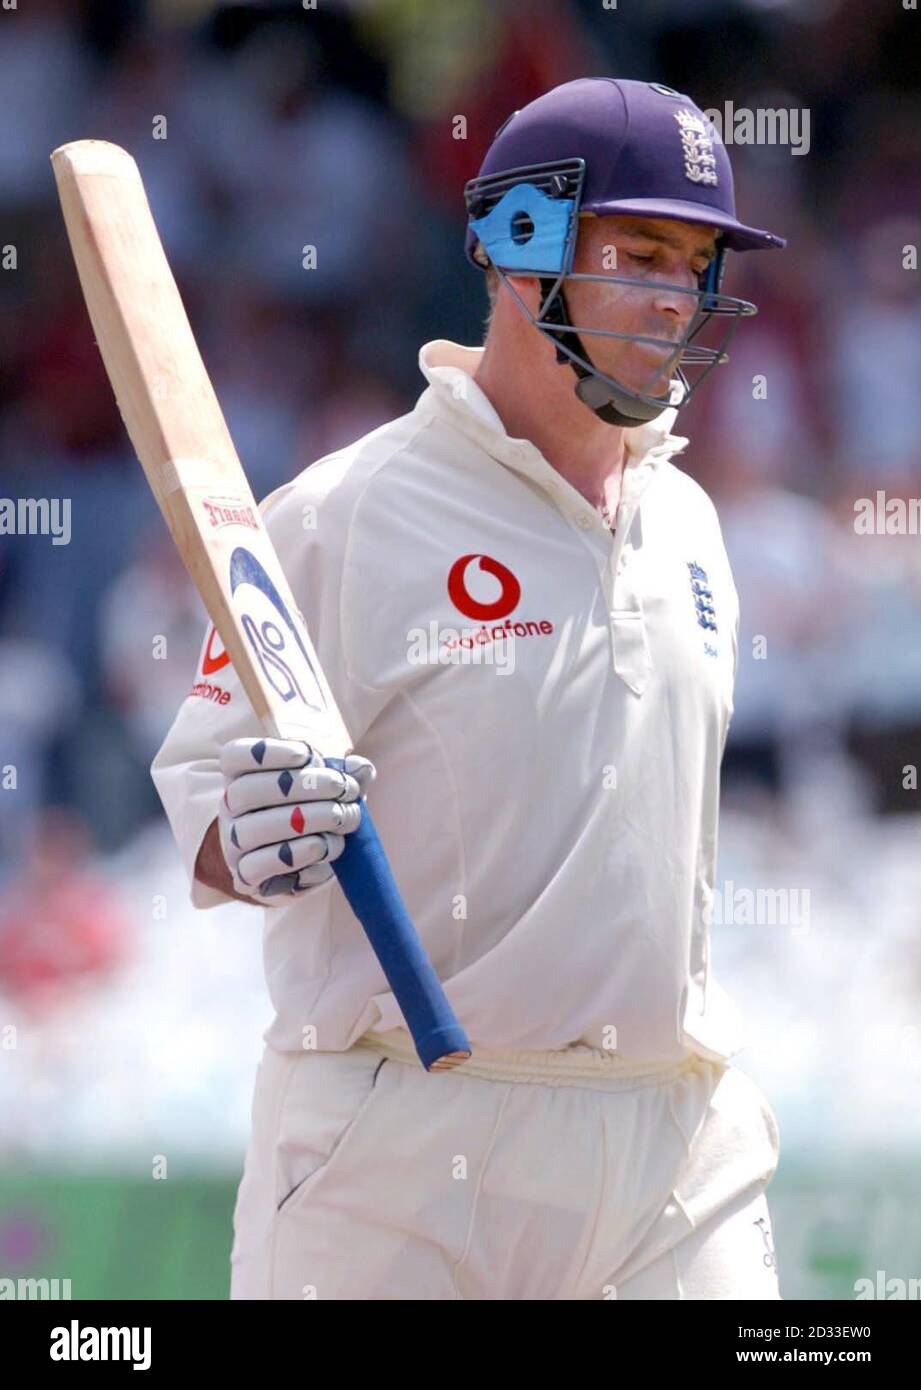 England batsman Graham Thorpe raises his bat as he walks off the pitch after being dismissed for 90 runs, during the fourth day of the second Test match against the West Indies at the Queen's Park Oval, Port of Spain, Trinidad. Stock Photo